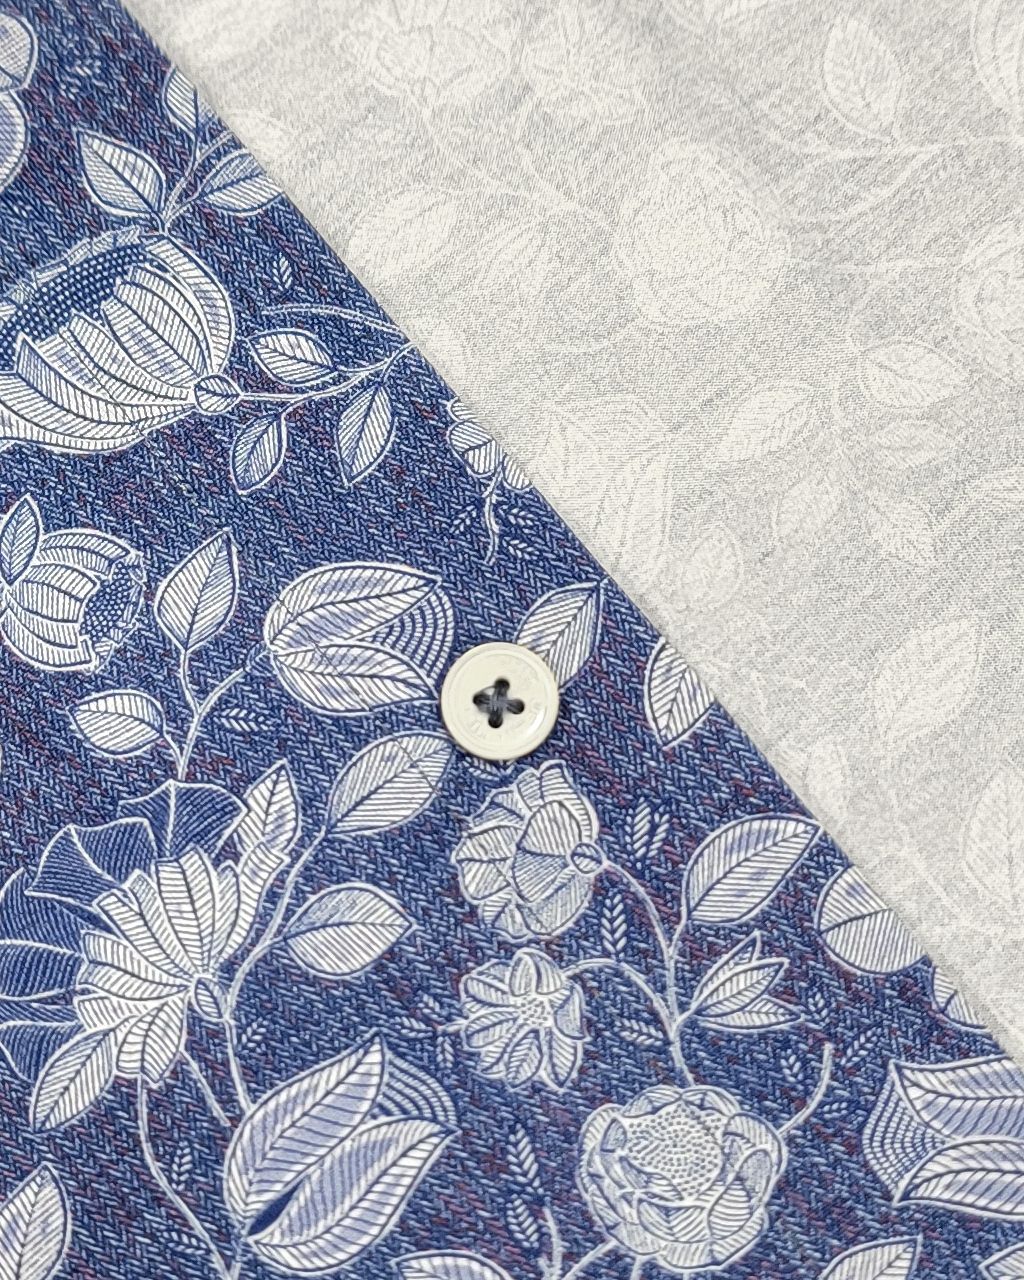 Bugatchi OoohCotton Casual Shirt in Blue Graphic Leaves